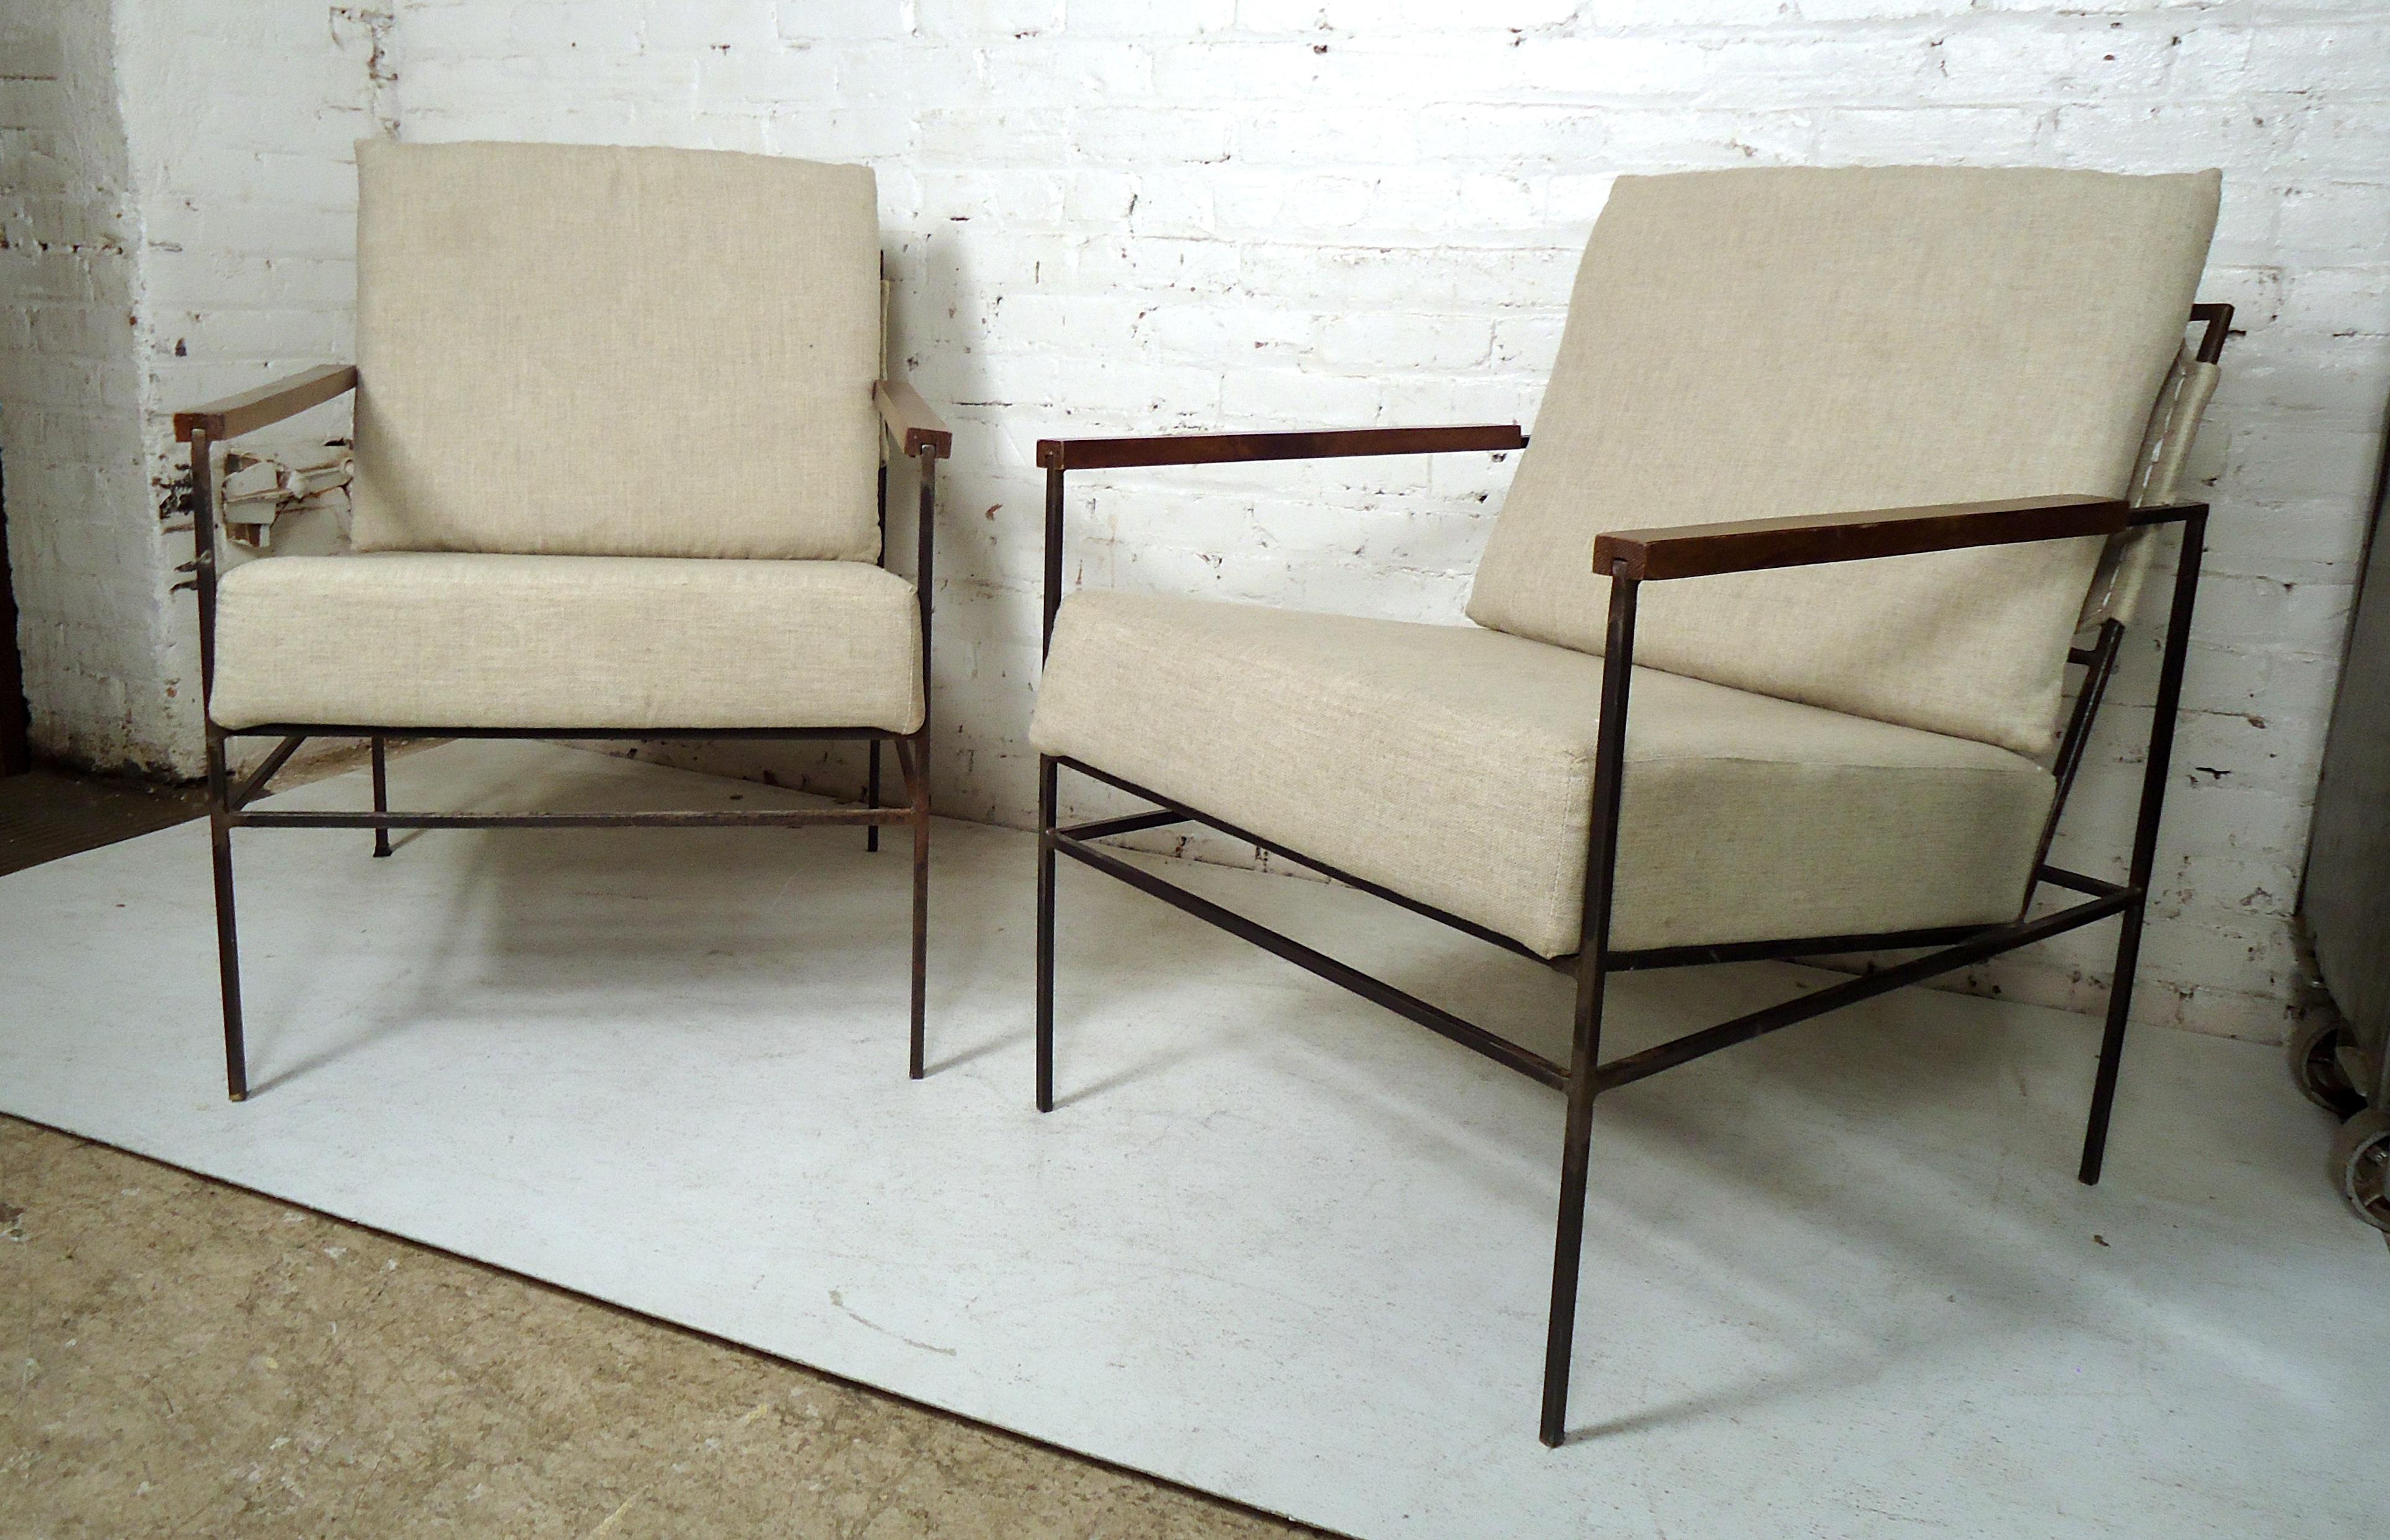 Sleek pair of vintage modern style iron frame lounge chairs feature wood armrests, upholstered seat and cushion.

(Please confirm item location NY or NJ with dealer).